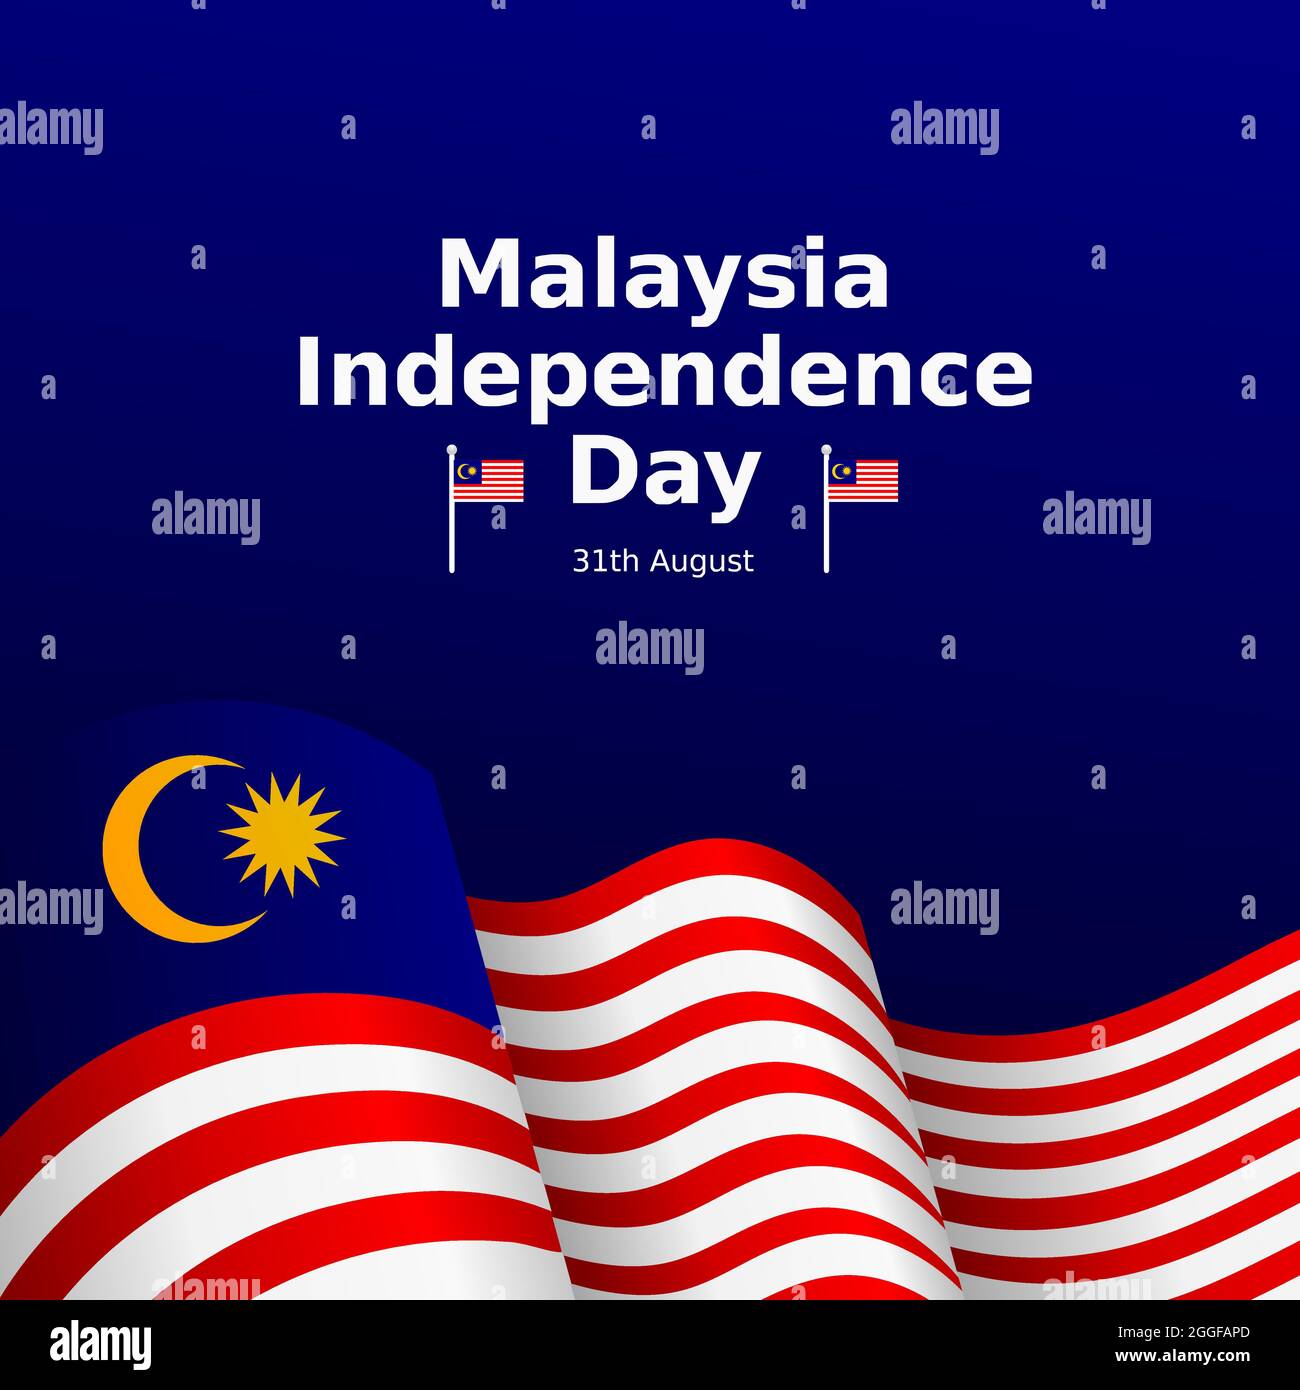 malaysia independence day vector illustration poster design Stock Vector